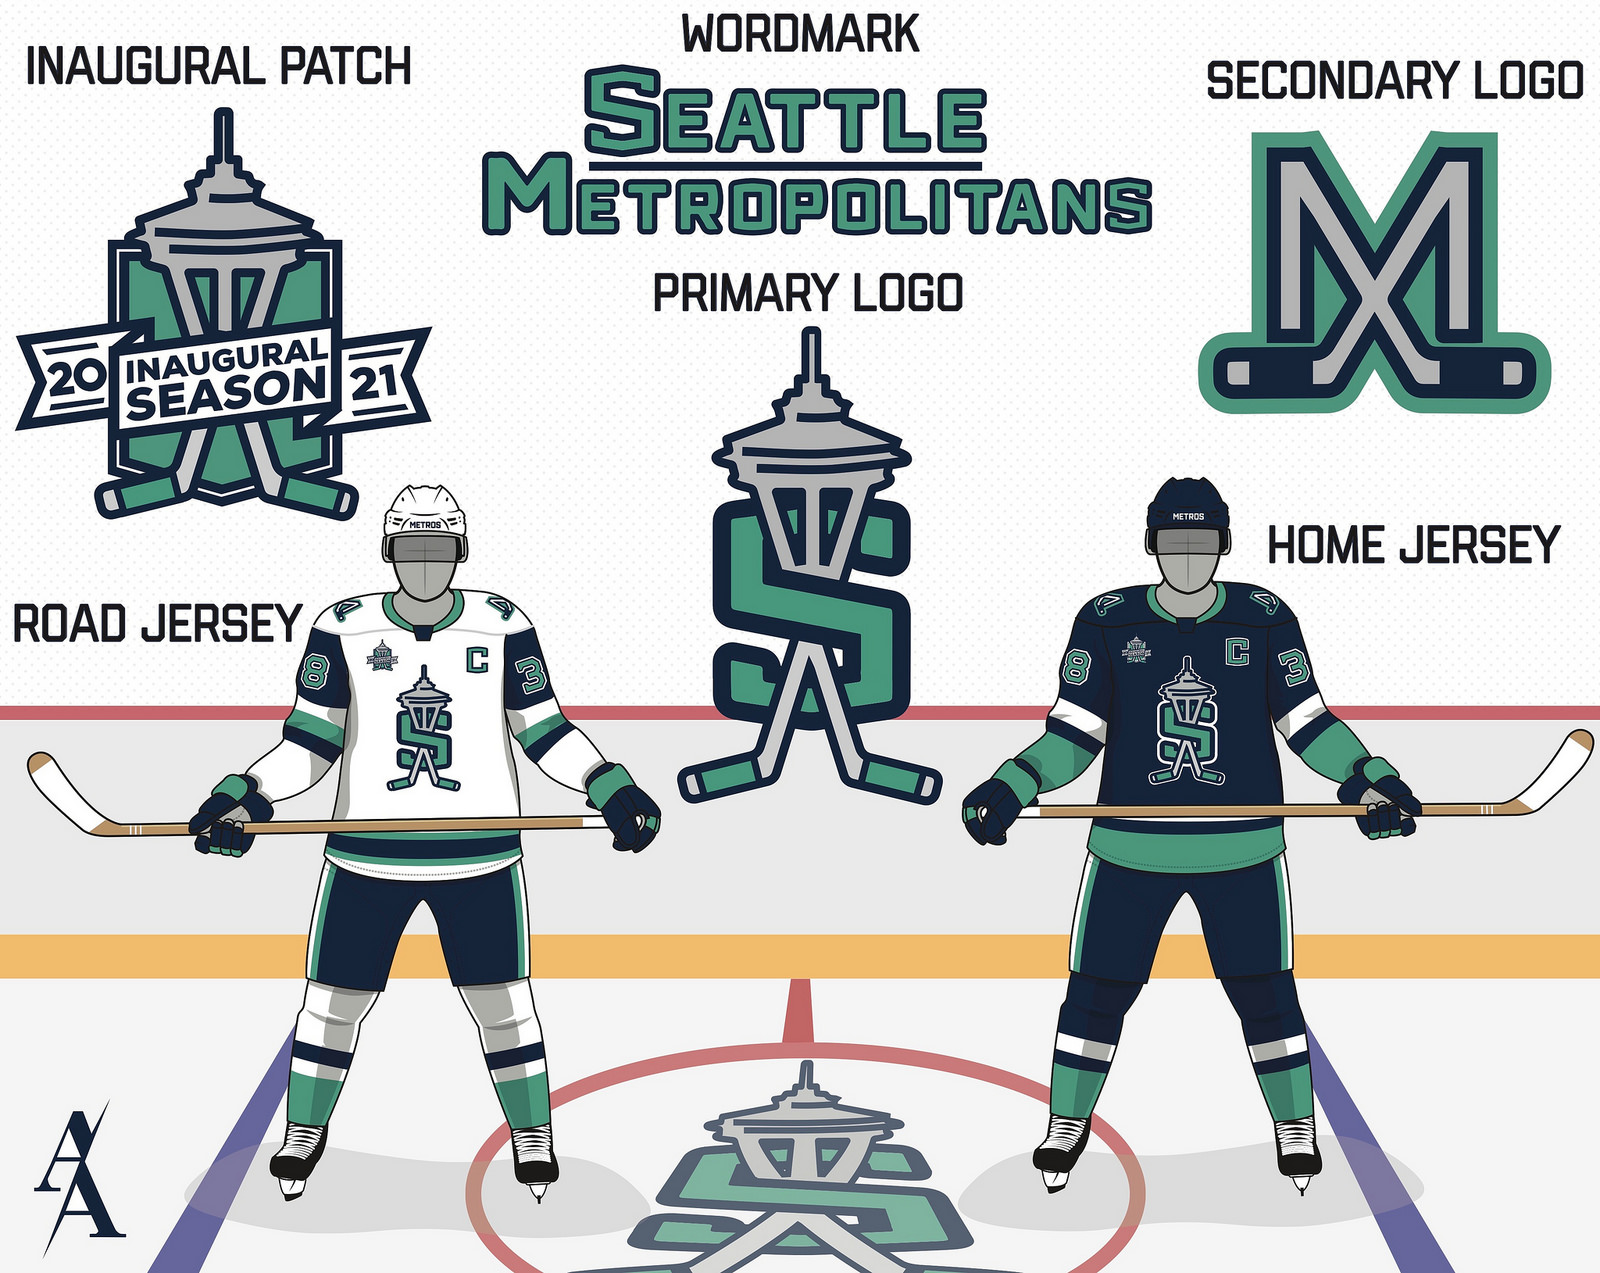 4 Concept Jerseys for NHL Expansion Teams